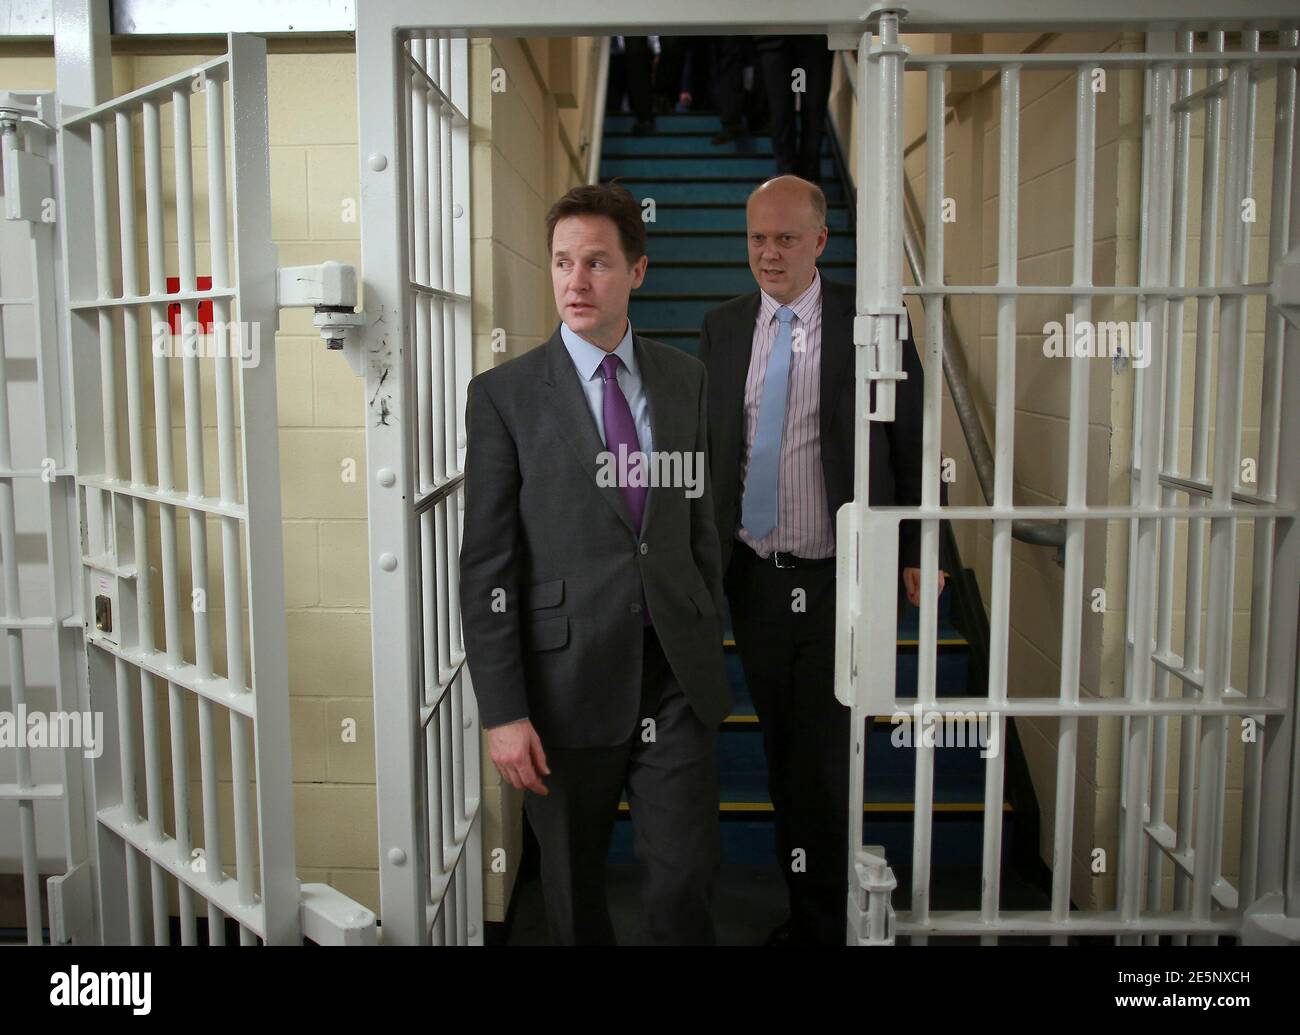 Britain's Deputy Prime Minister Nick Clegg (L) and Justice Minister Chris Grayling pay a visit to the Cookham Wood Young Offenders Institution in Rochester, southern England January 16, 2014.  REUTERS/Peter Macdiarmid/Pool   (BRITAIN - Tags: CRIME LAW POLITICS) Stock Photo